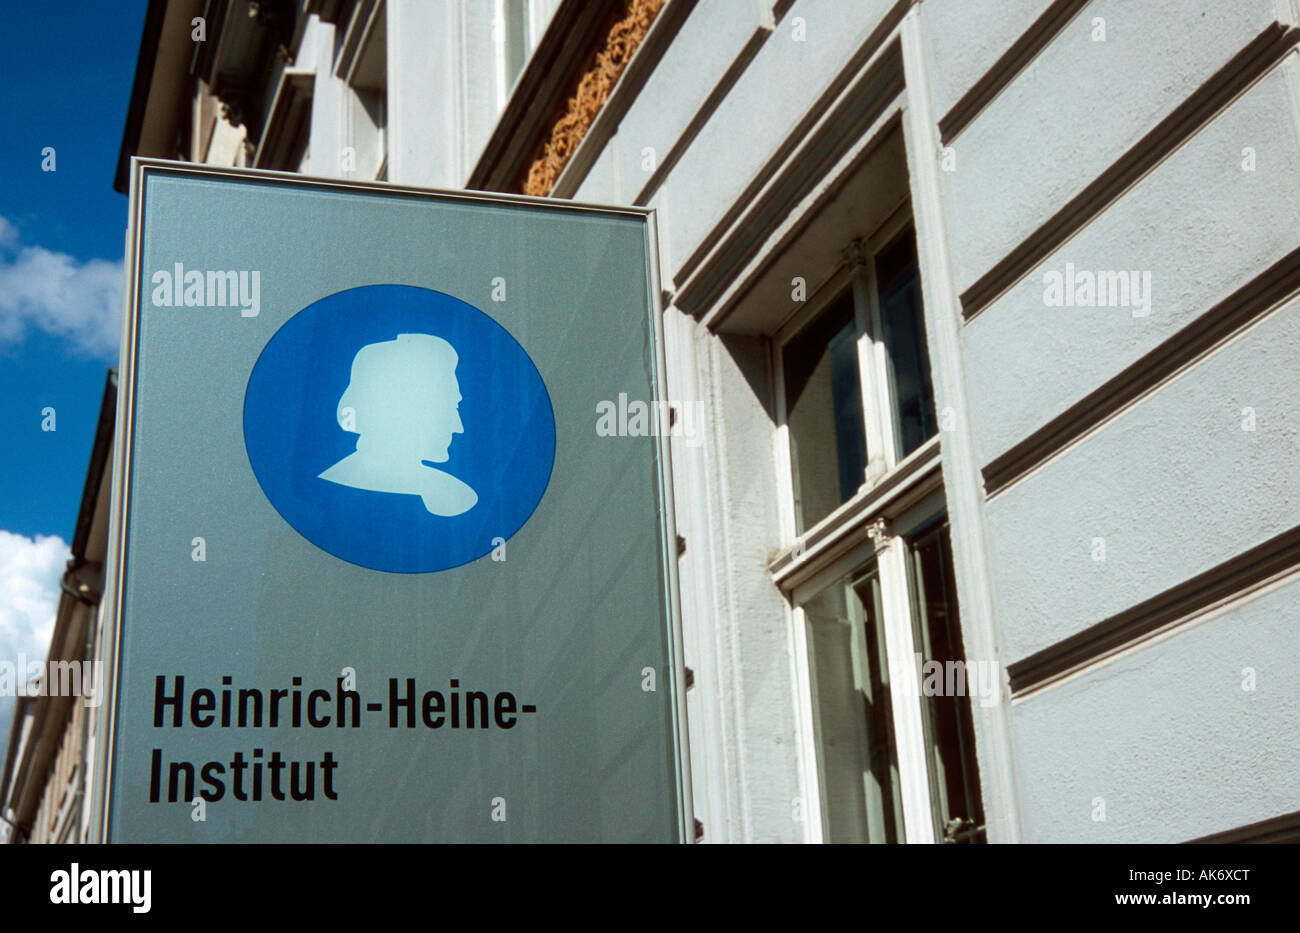 Heinrich heine institut hi-res stock photography and images - Alamy